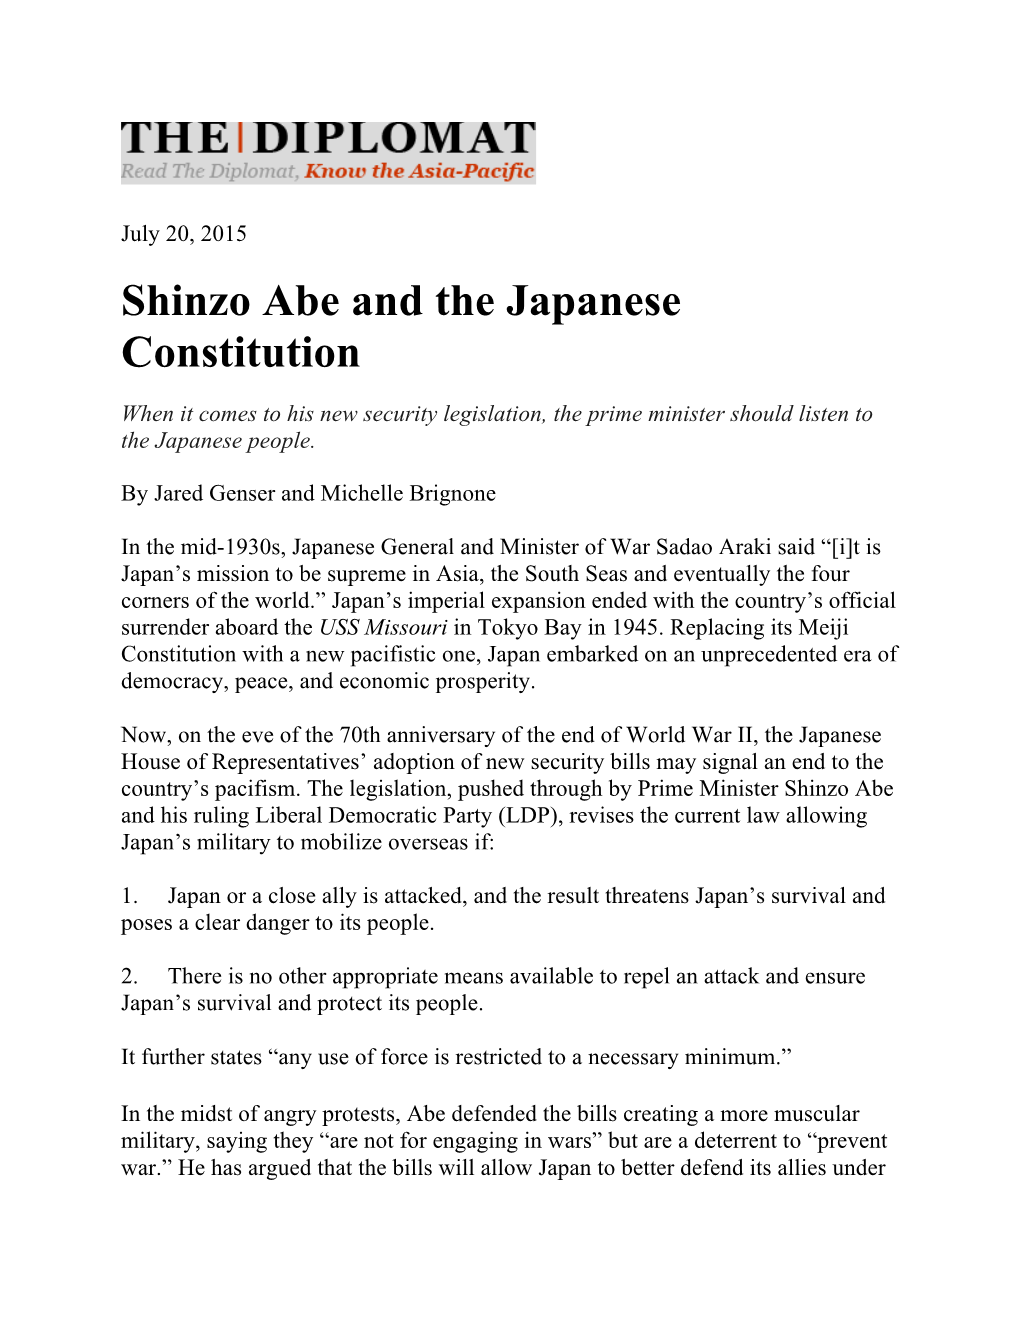 Shinzo Abe and the Japanese Constitution